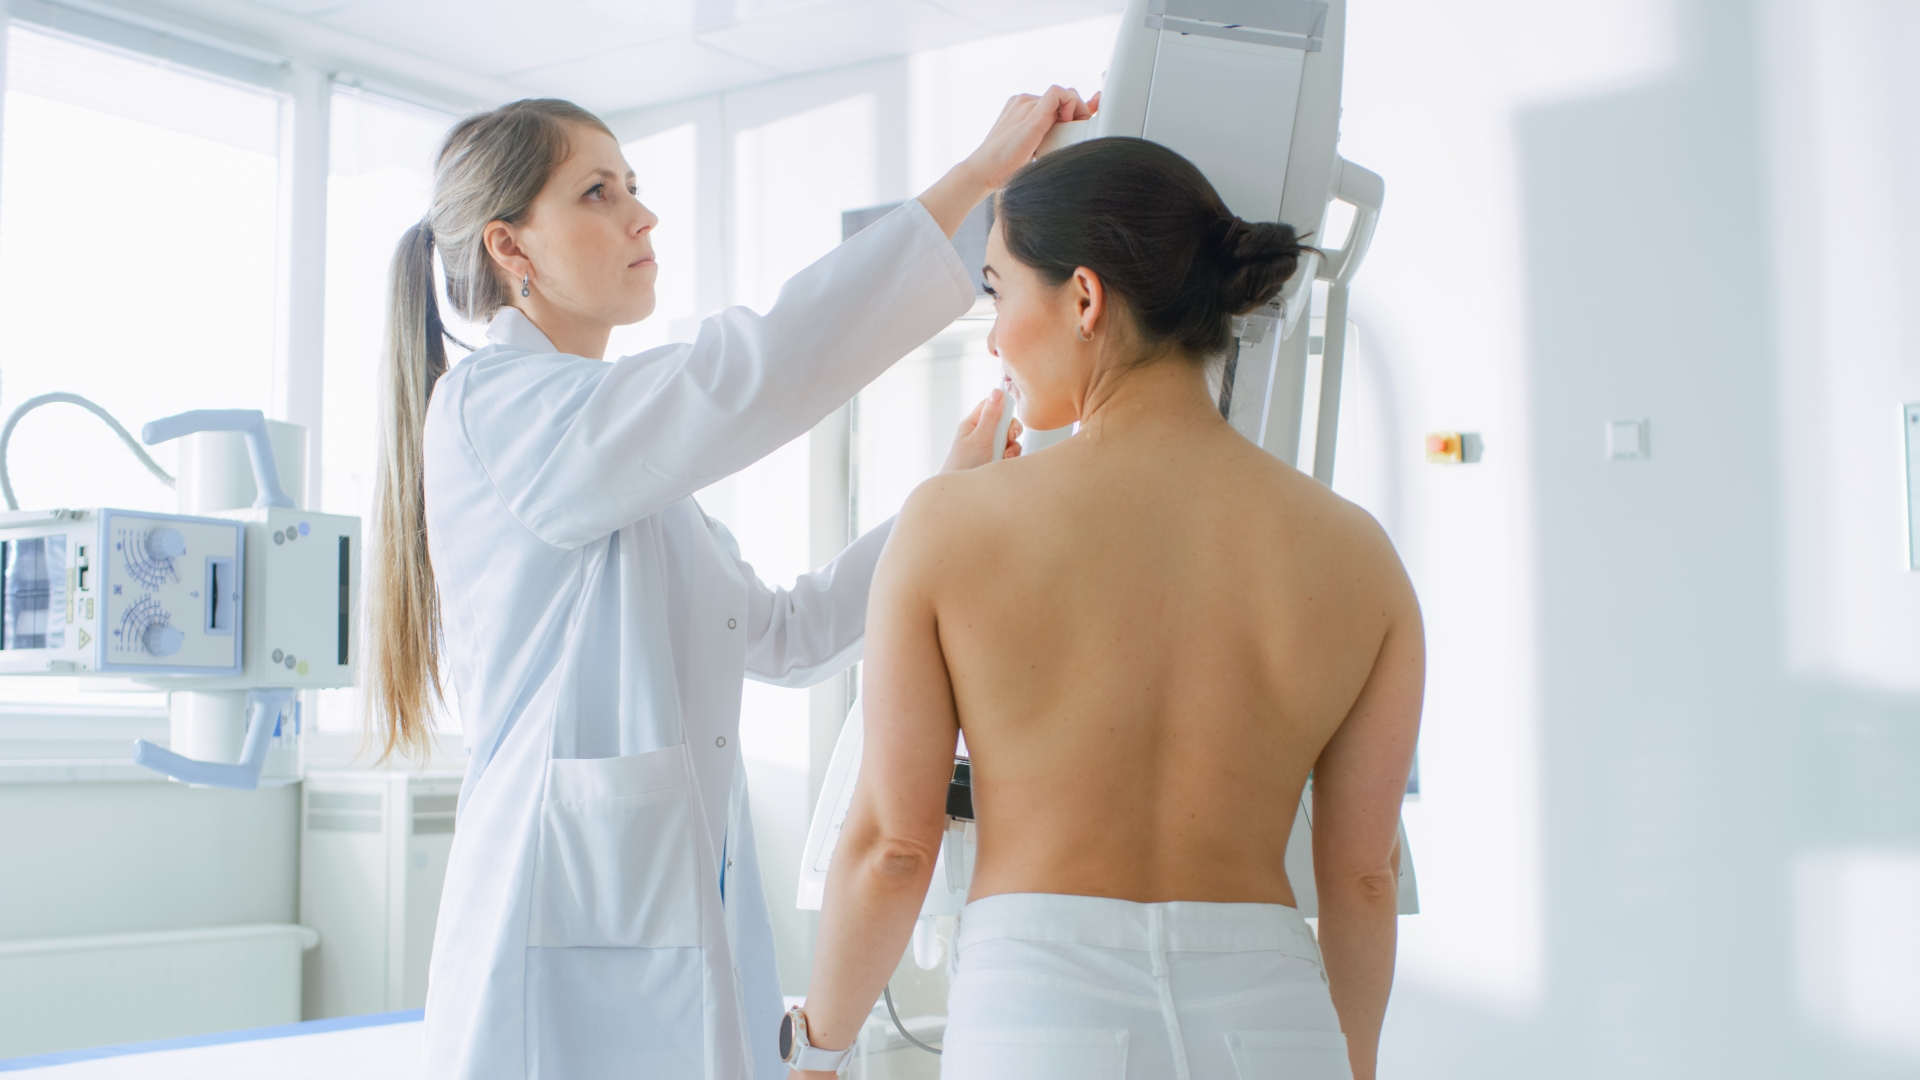 Breast cancer: What are the symptoms and how to check for the disease?